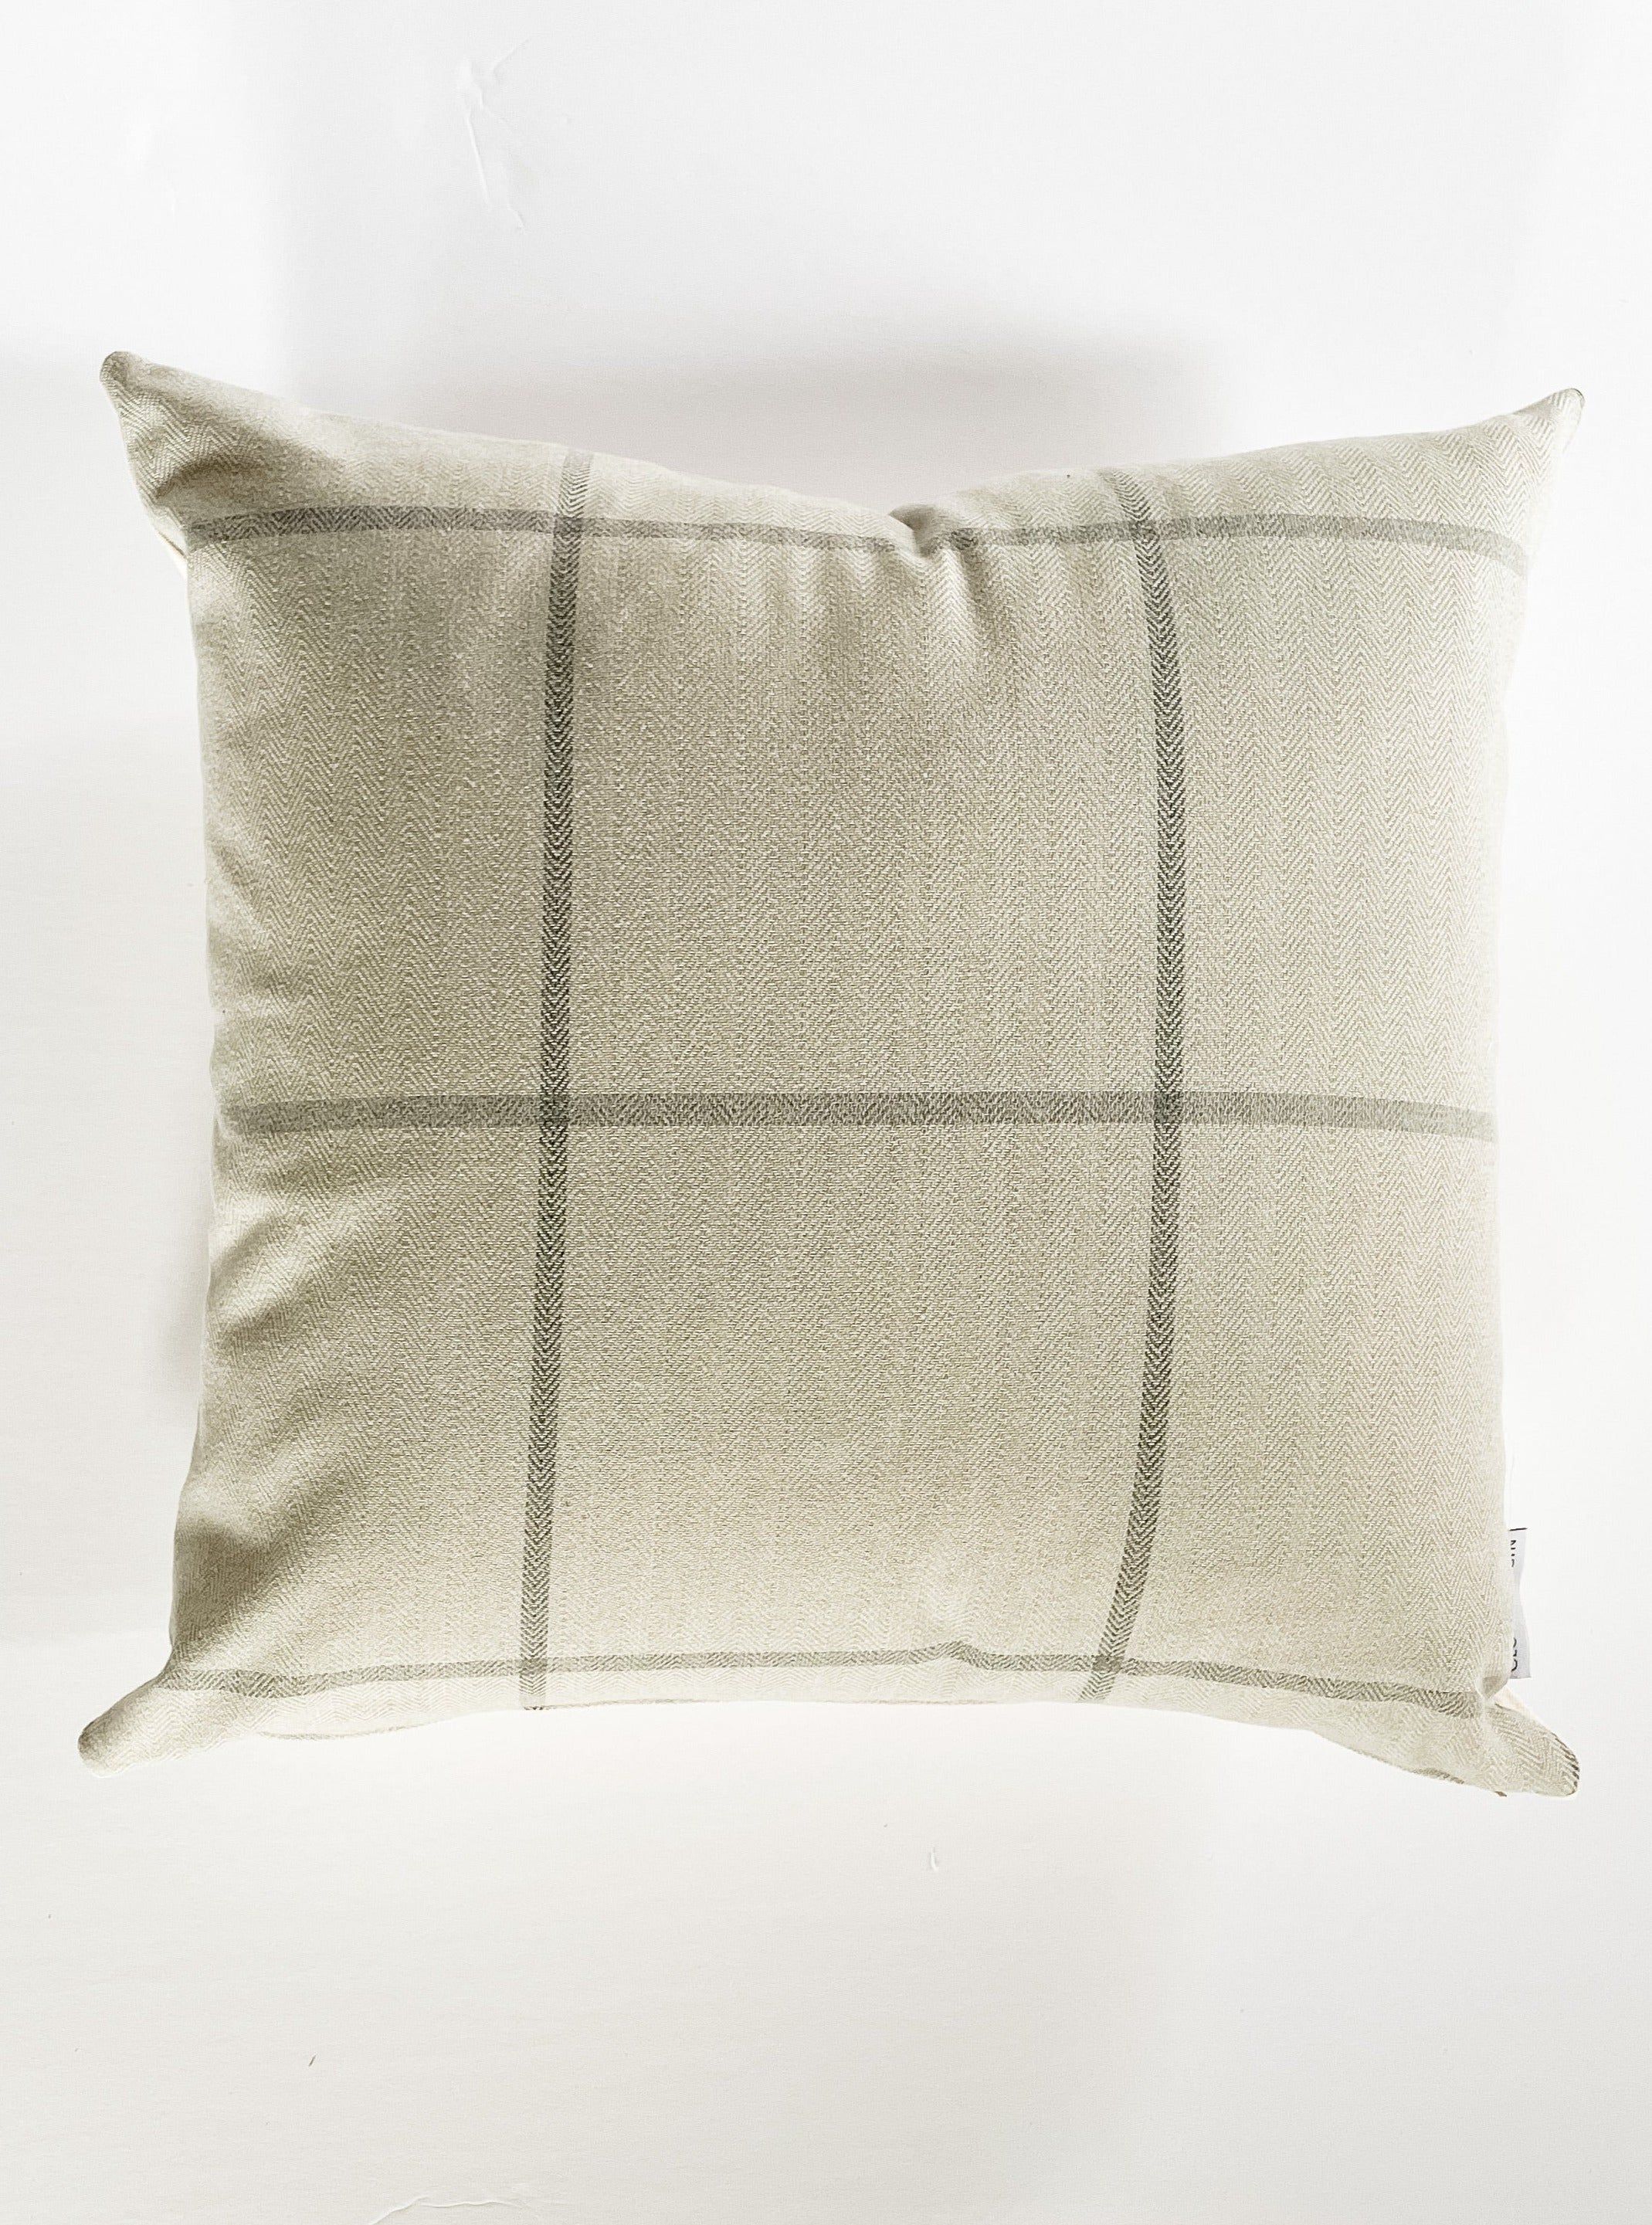 C+C Worsted Plaid Pillow Cover | Cloth + Cabin